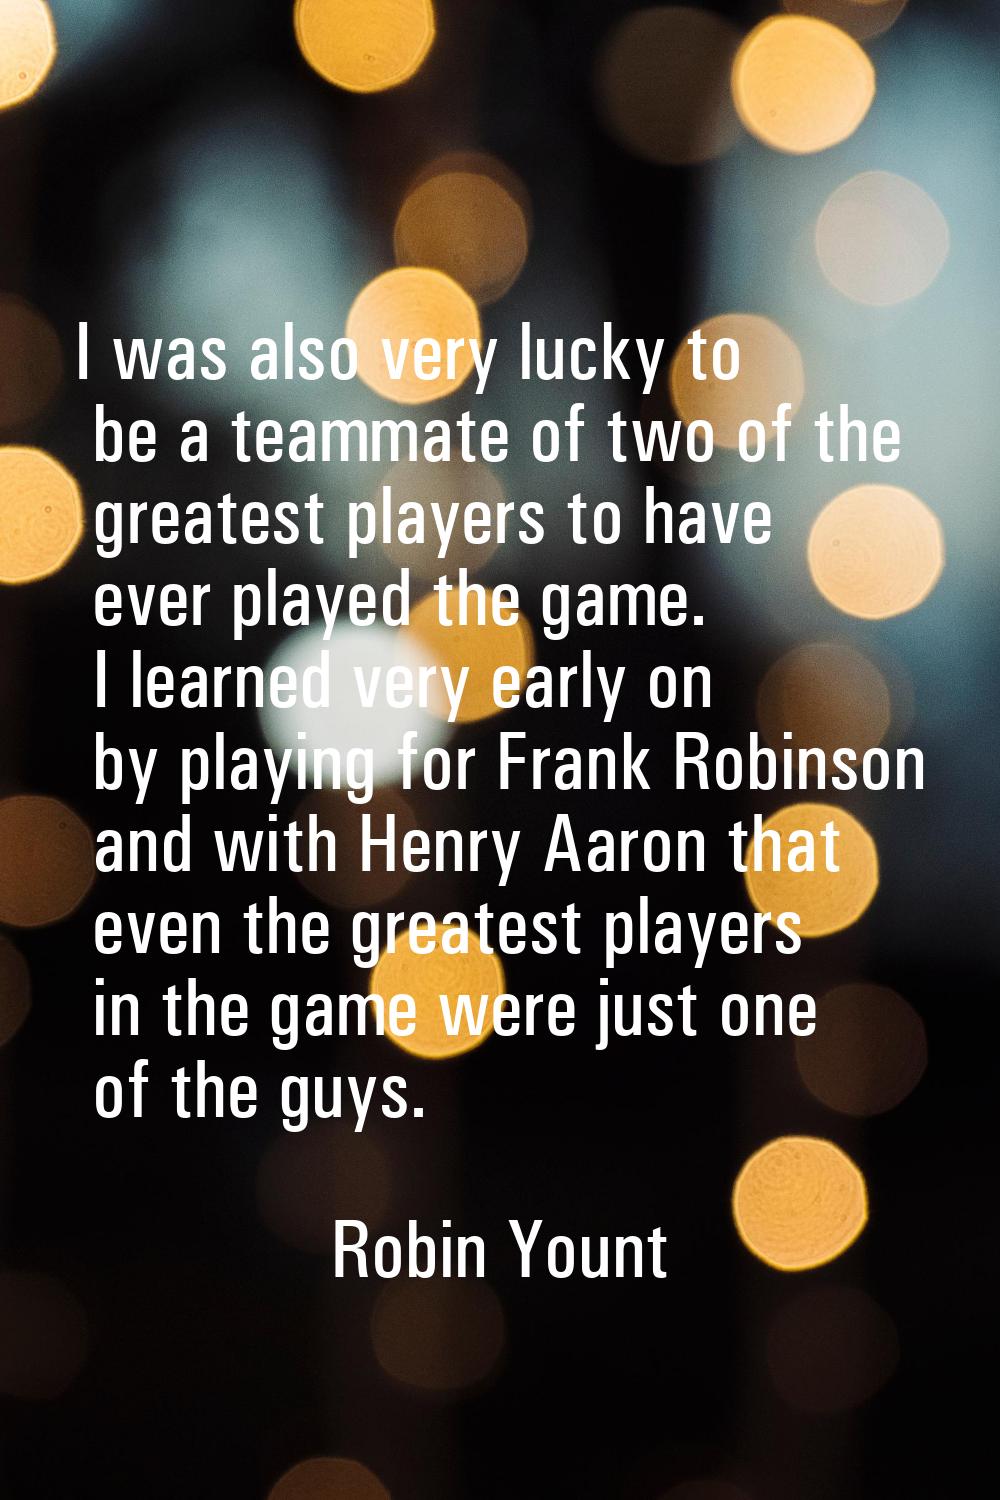 I was also very lucky to be a teammate of two of the greatest players to have ever played the game.